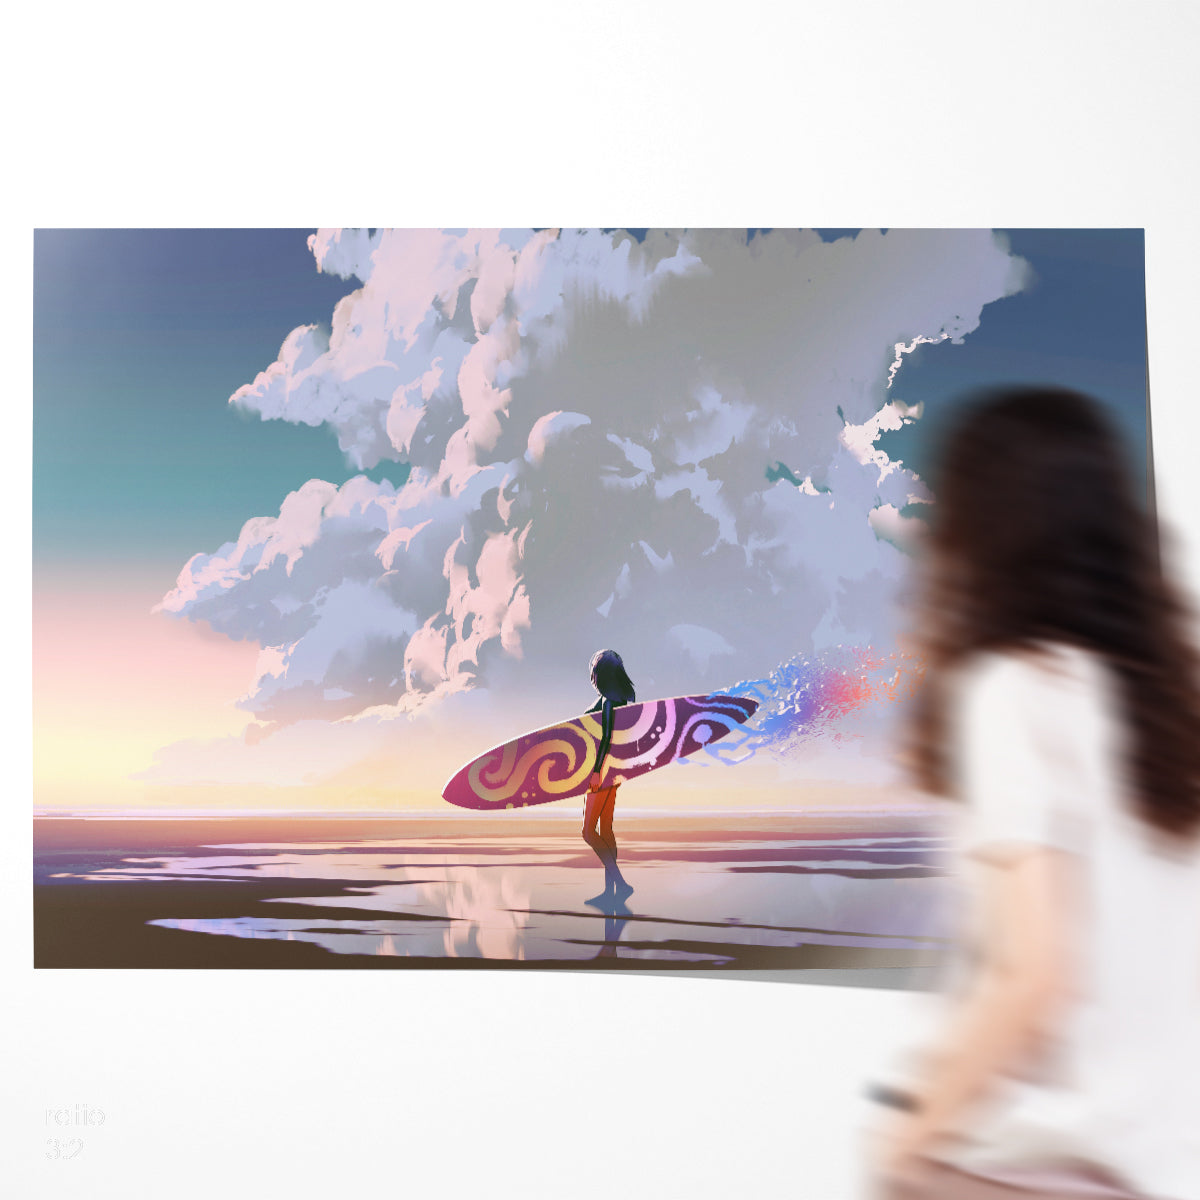 Woman Surfer on Beach Creative Poster-Horizontal Posters NOT FRAMED-CetArt-10″x8″ inches-CetArt